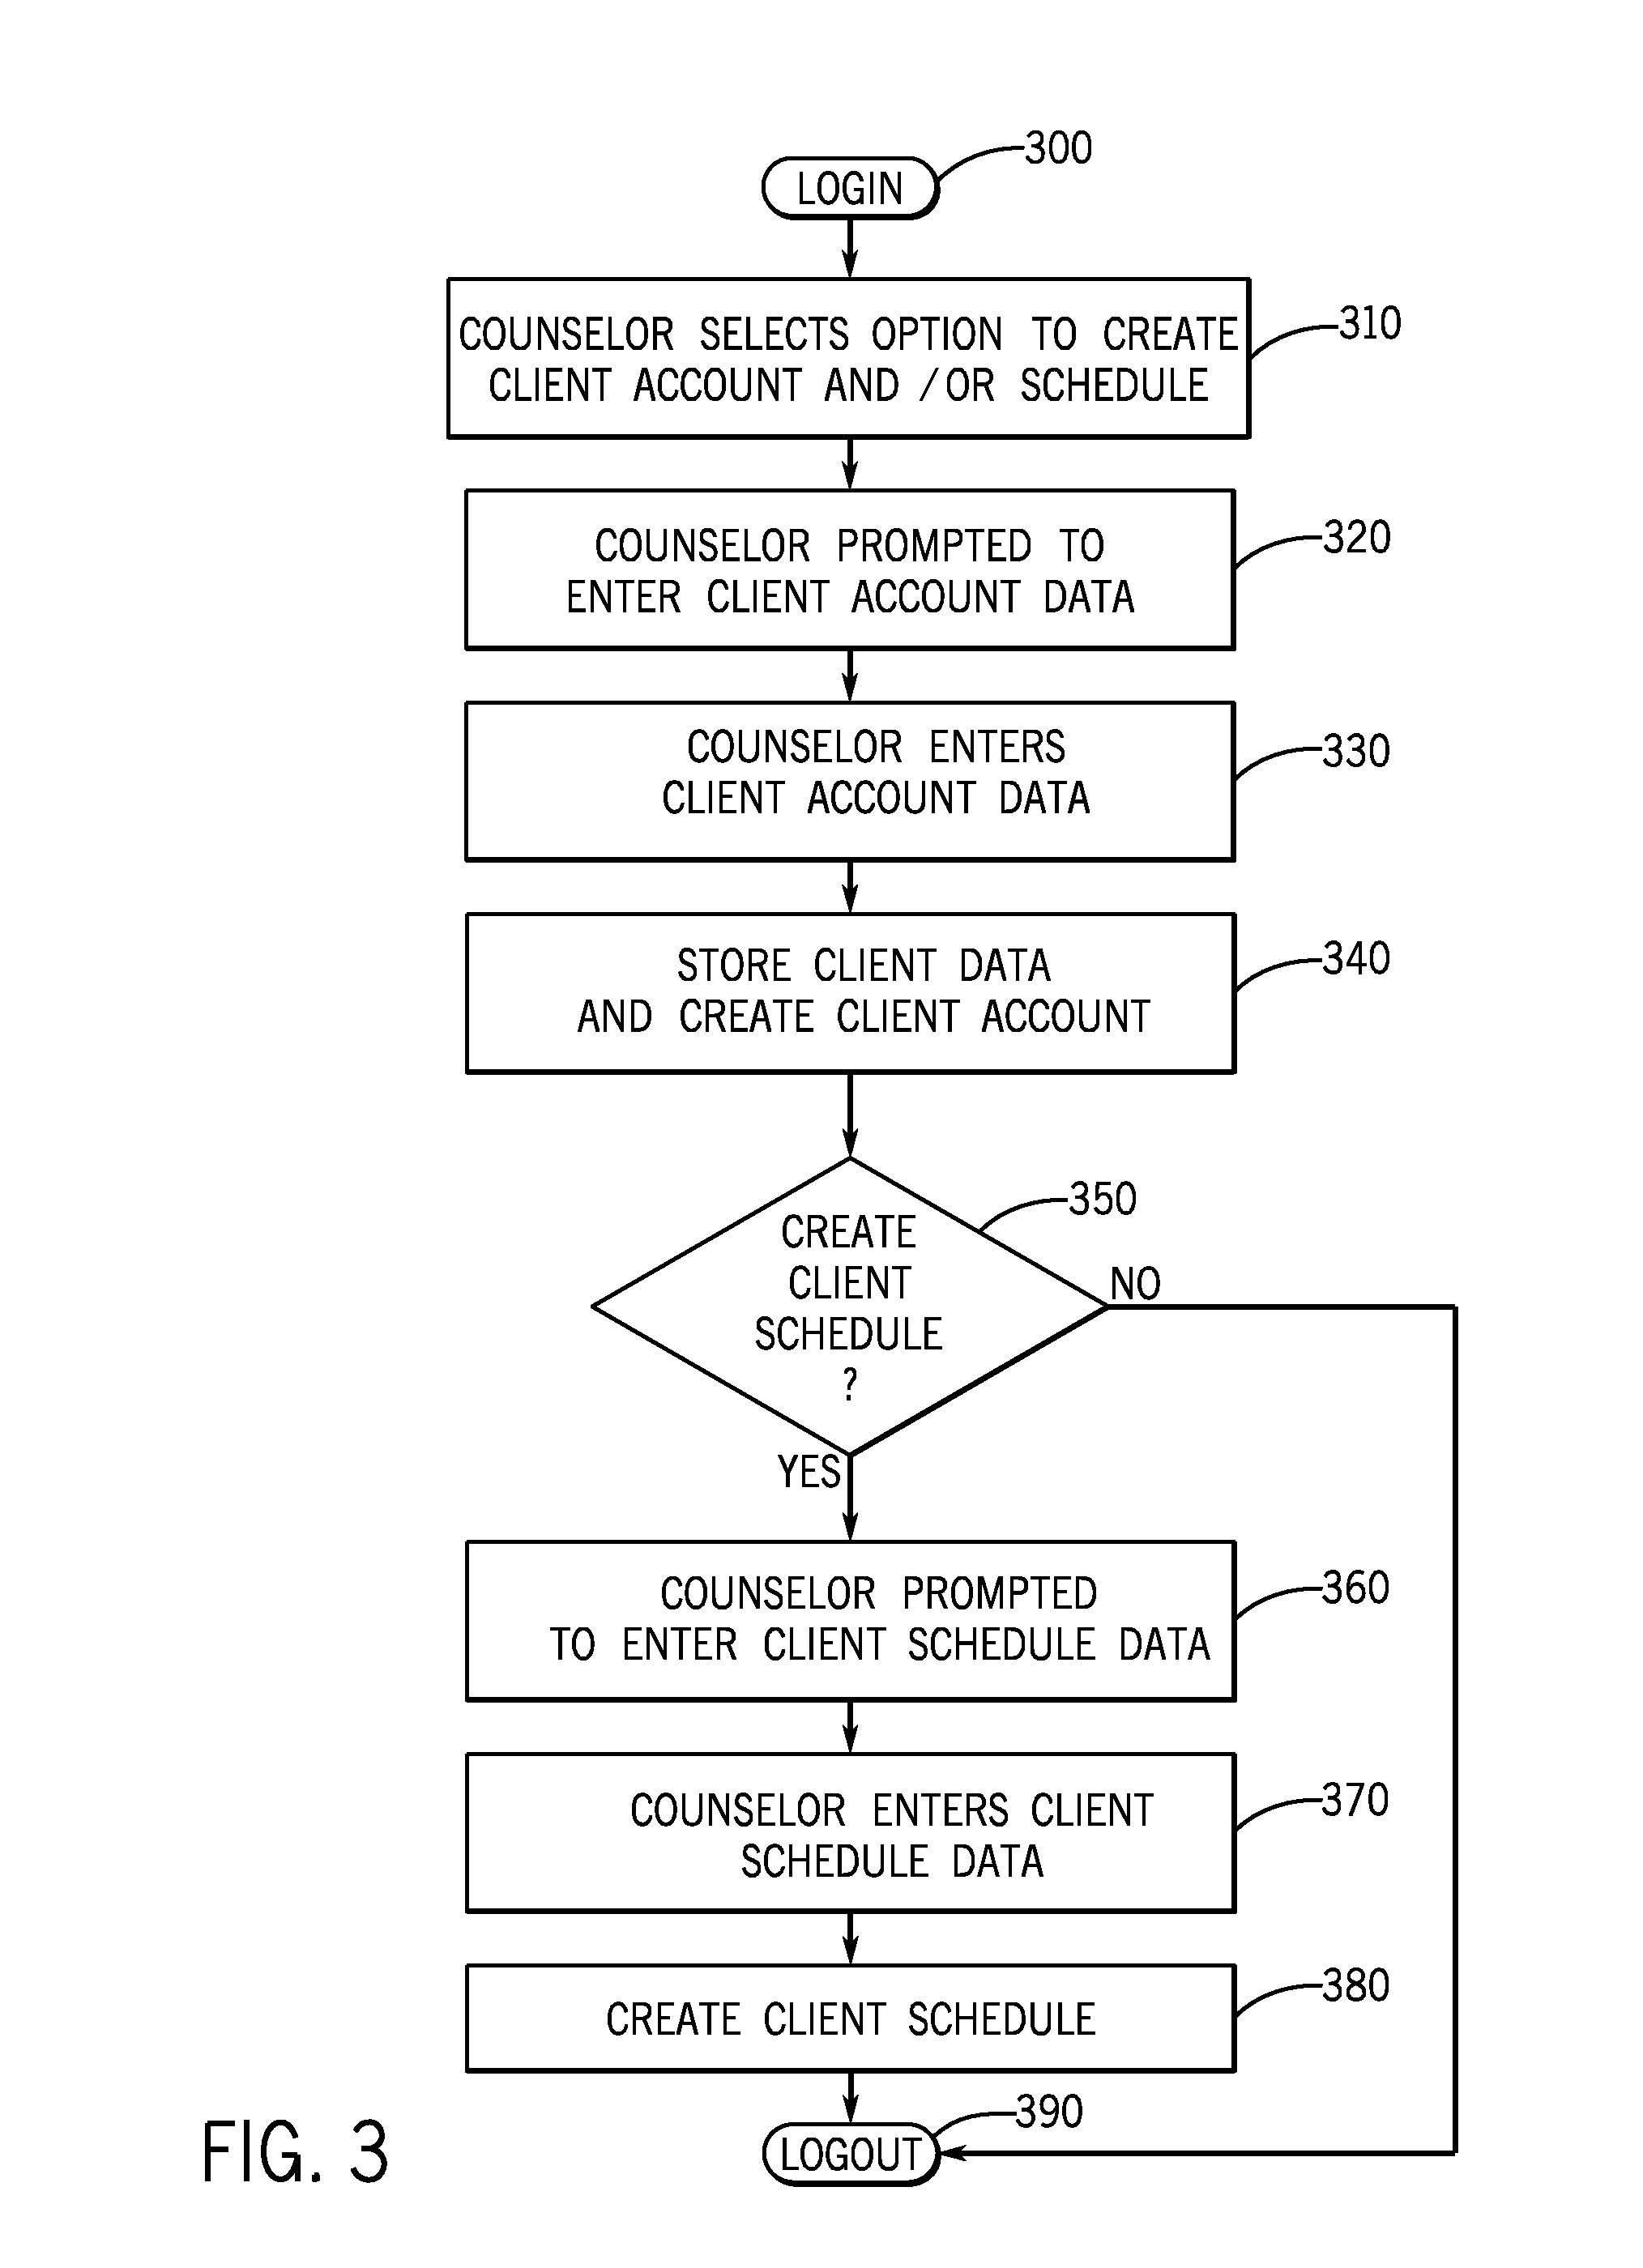 System and method for providing a client engagement platform to assist a client in the compliance of addiction treatment